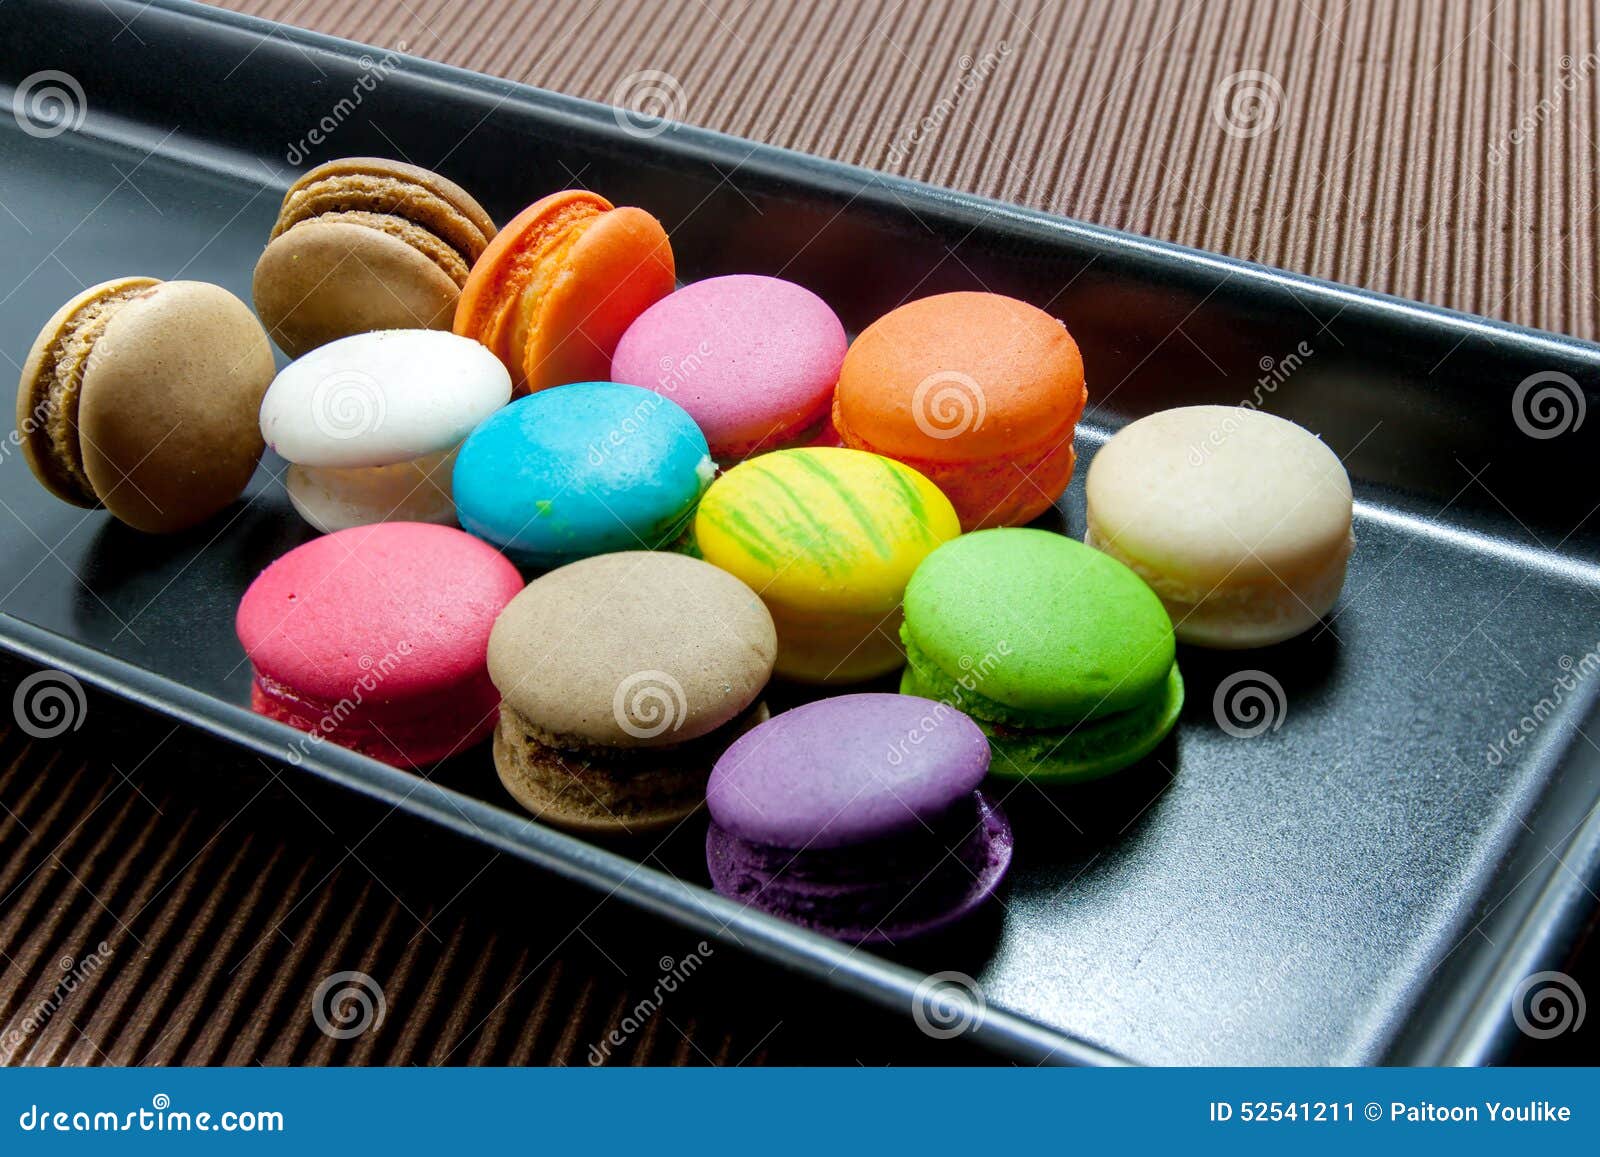 Colorful Macaroons in Black Ceramic Plate Stock Image - Image of mint ...